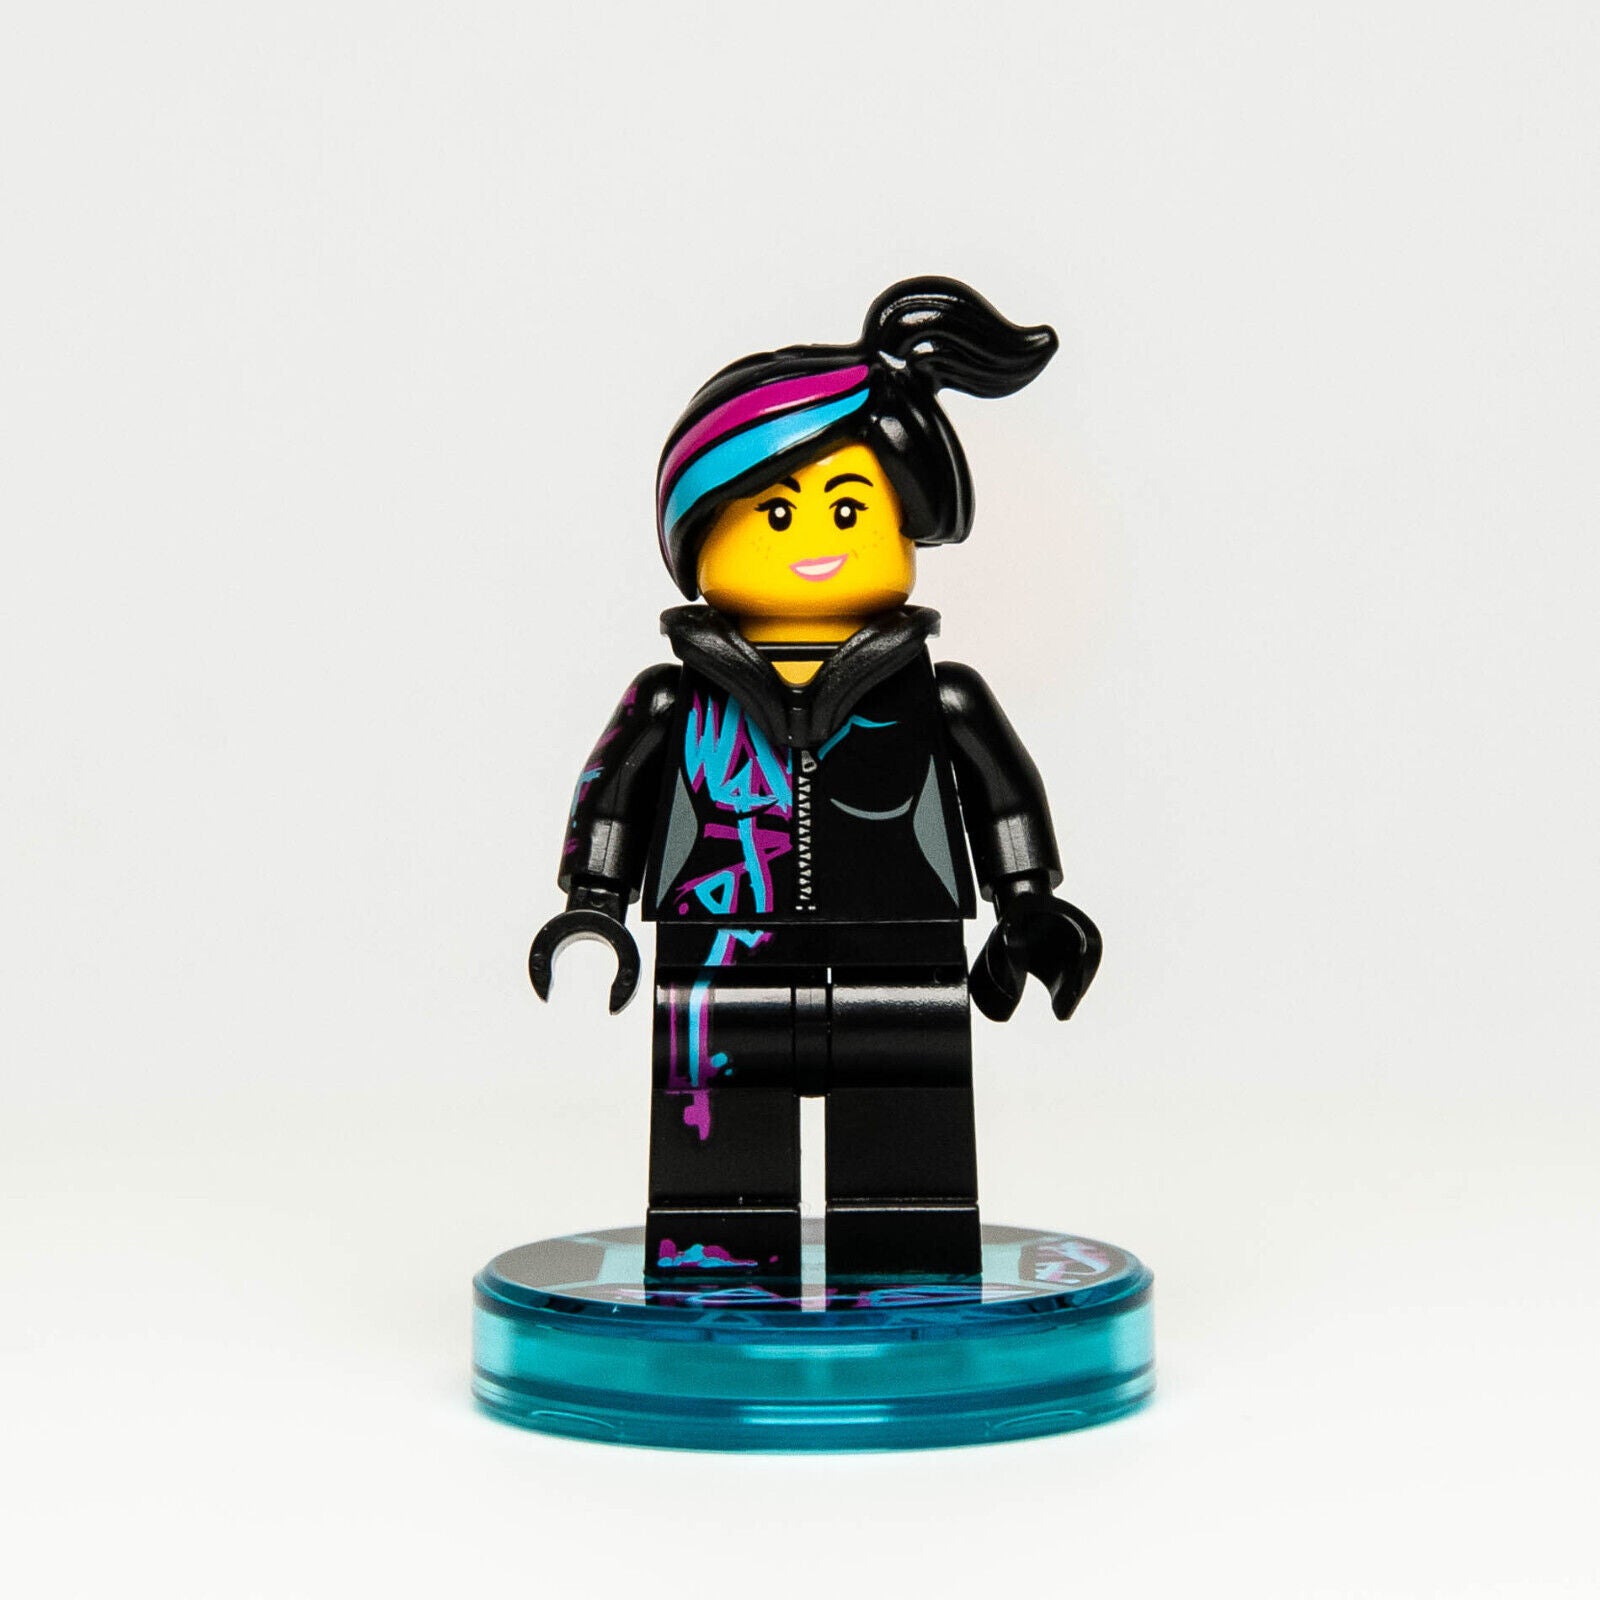 New Lego Minifigure - Wyldstyle w/ Dimensions Base Tag Relic Tile 71200 (tlm099)